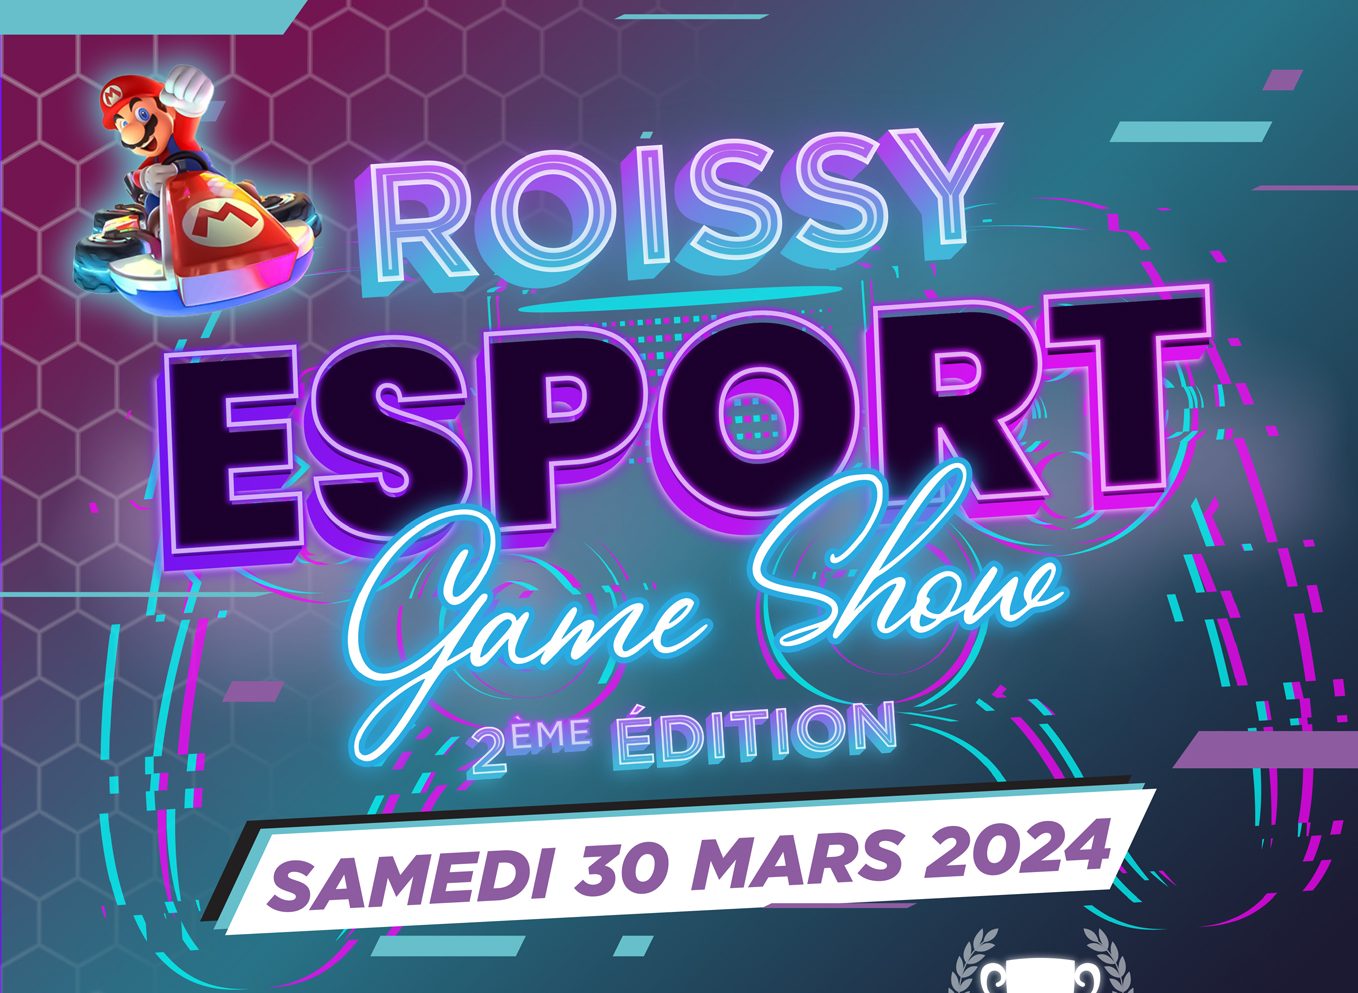 Roissy Esport Game Show returns on March 30!